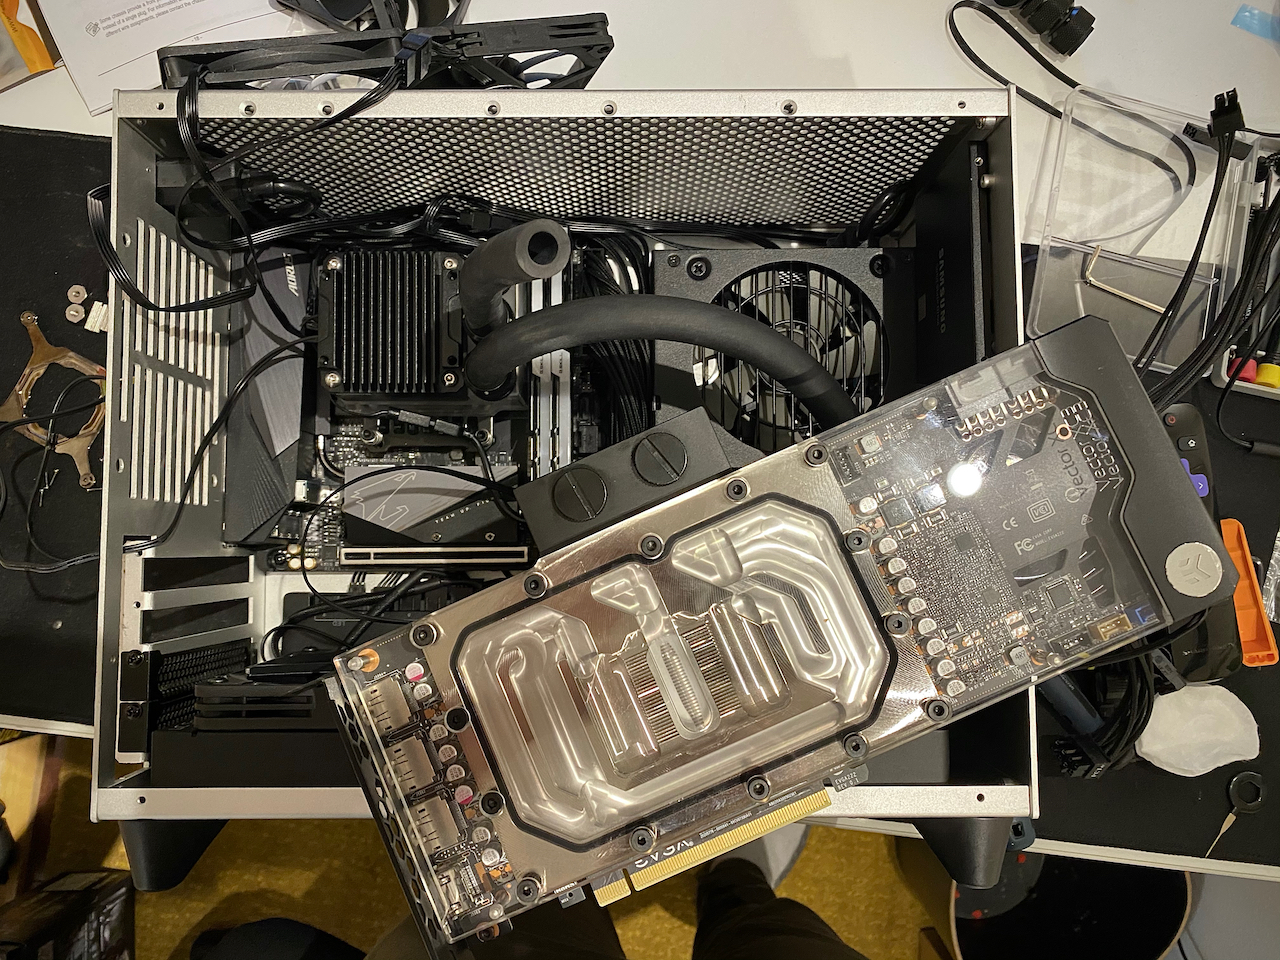 Graphics card with clear acrylic side visible showing the shiney nickel water block interior. Laying on top of the messy partially assembled computer.